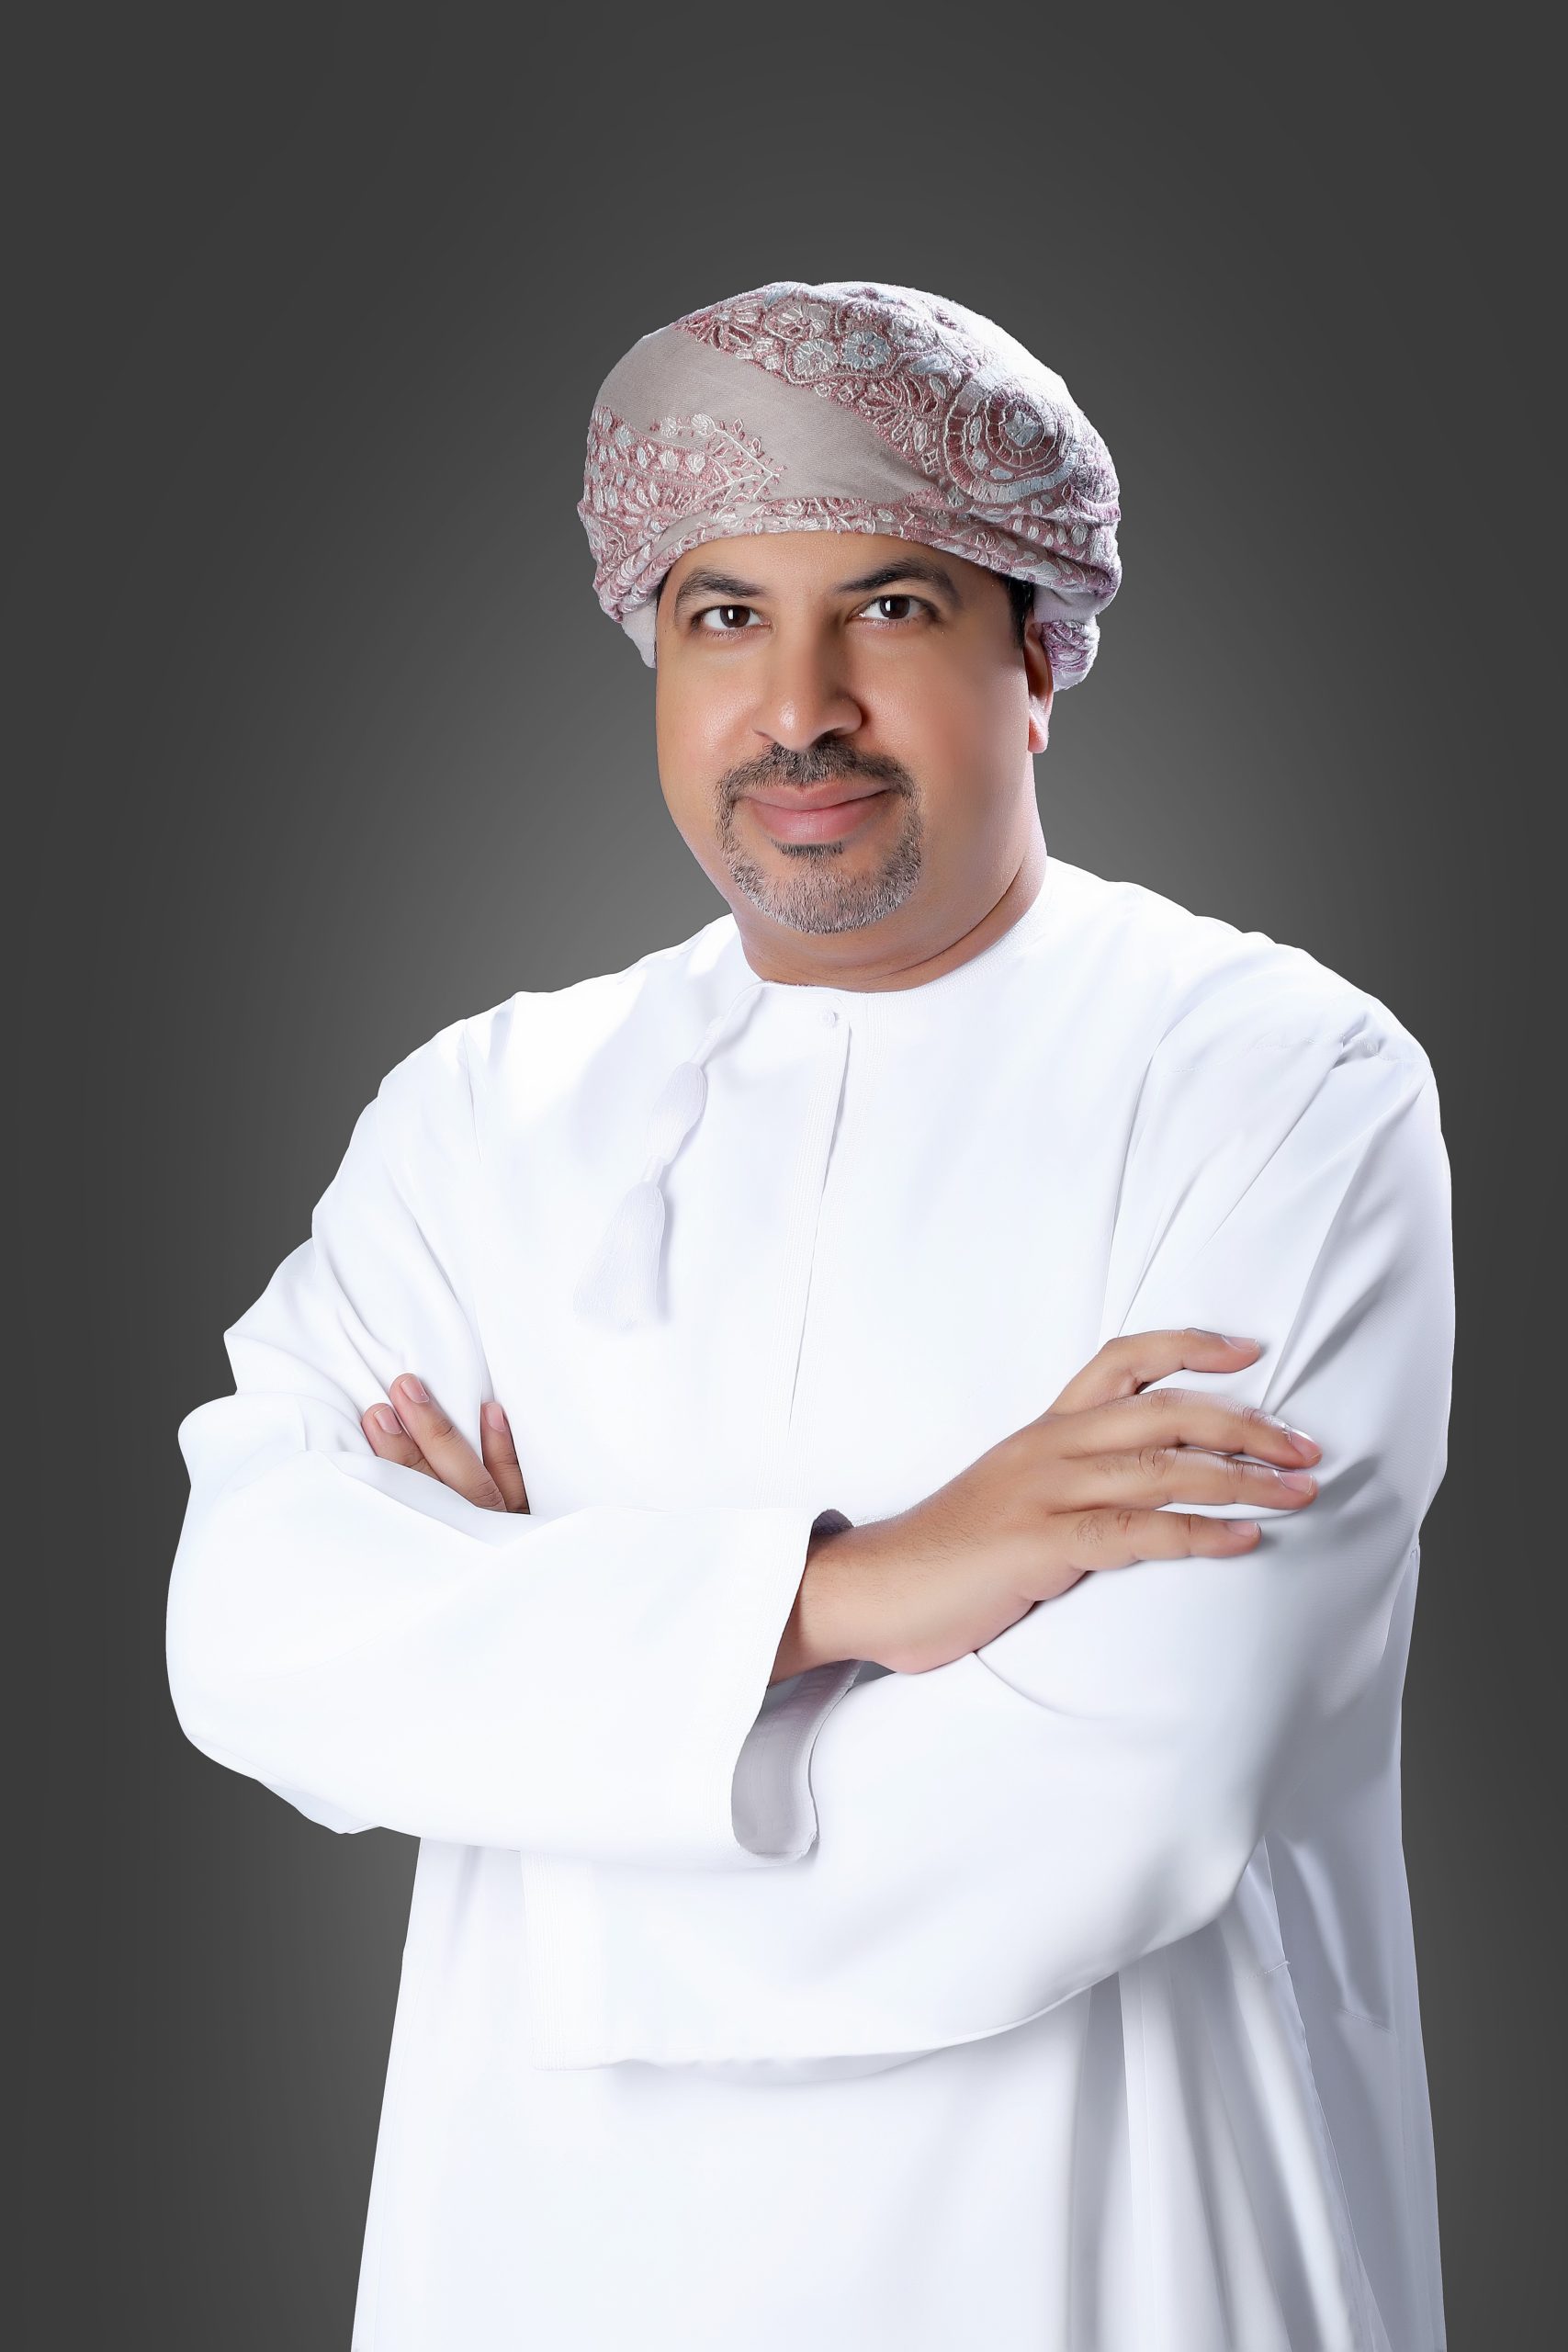 Mashreq announces appointment of Alsalt Mohammed al Kharusi as Country Head of Oman